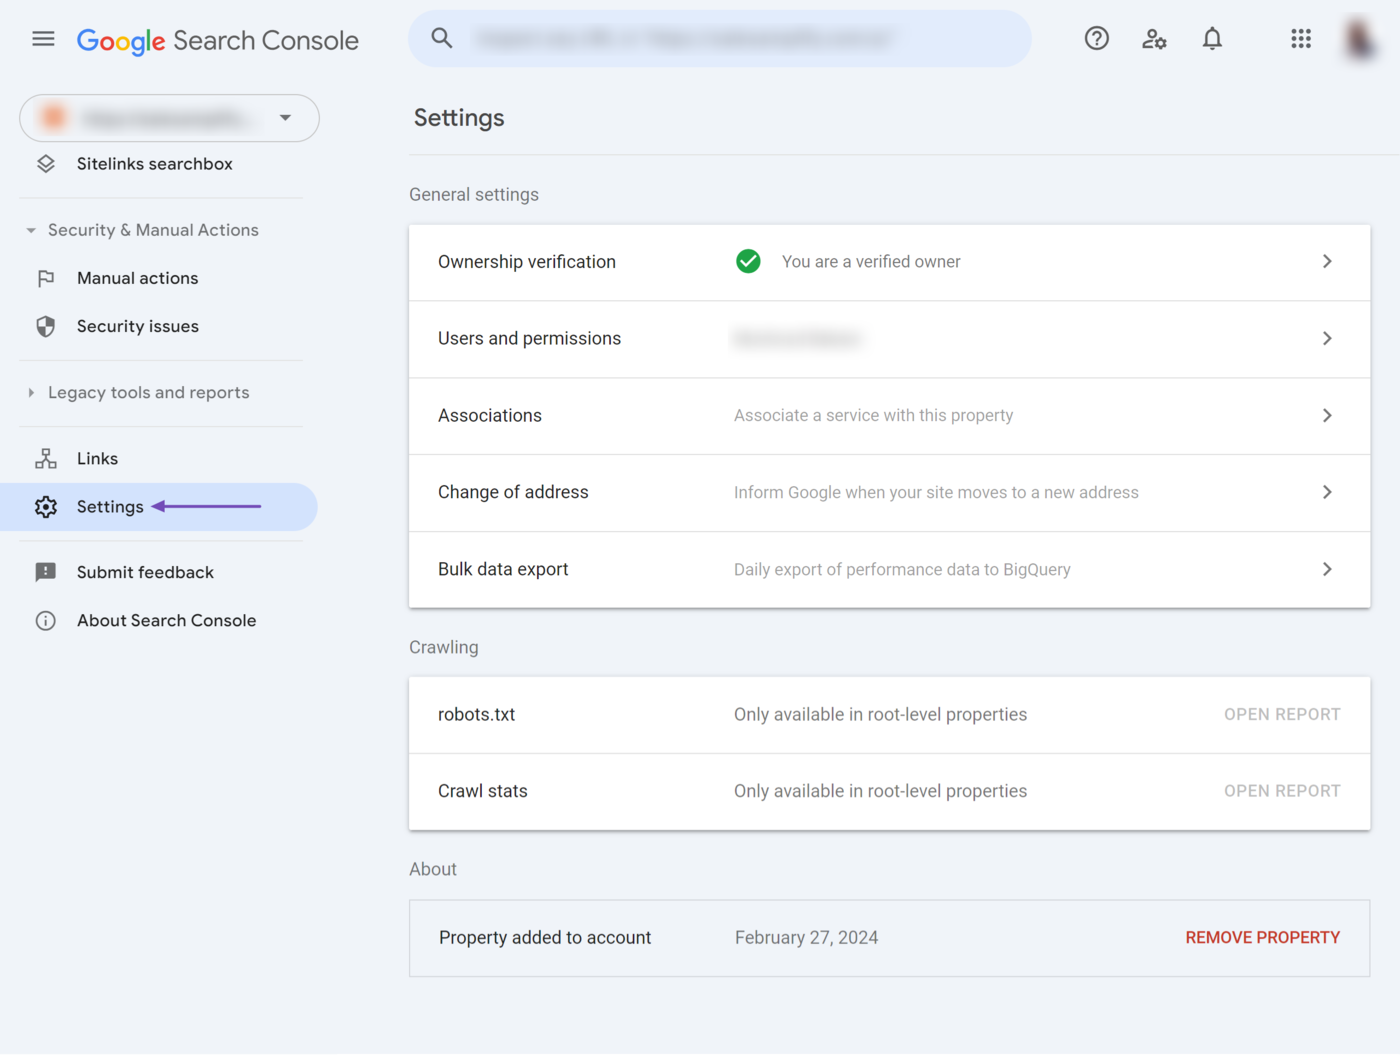 Overview of the Settings option in Google Search Console